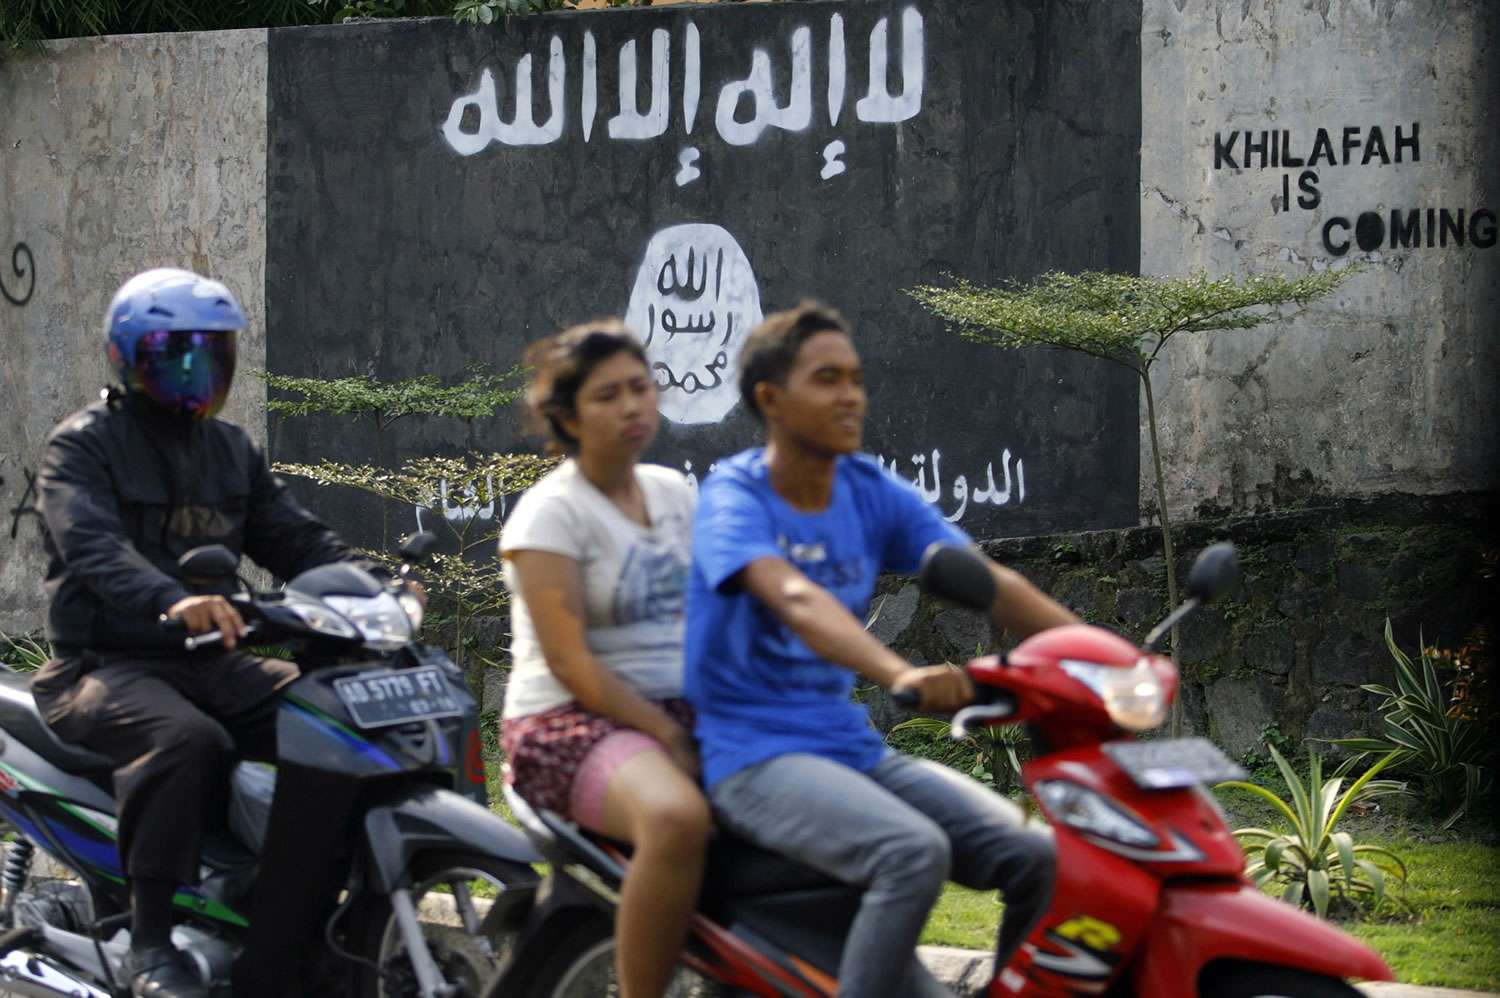 Motorists ride past a graffiti of the Islamic State group's flag in Solo, Central Java, Indonesia.